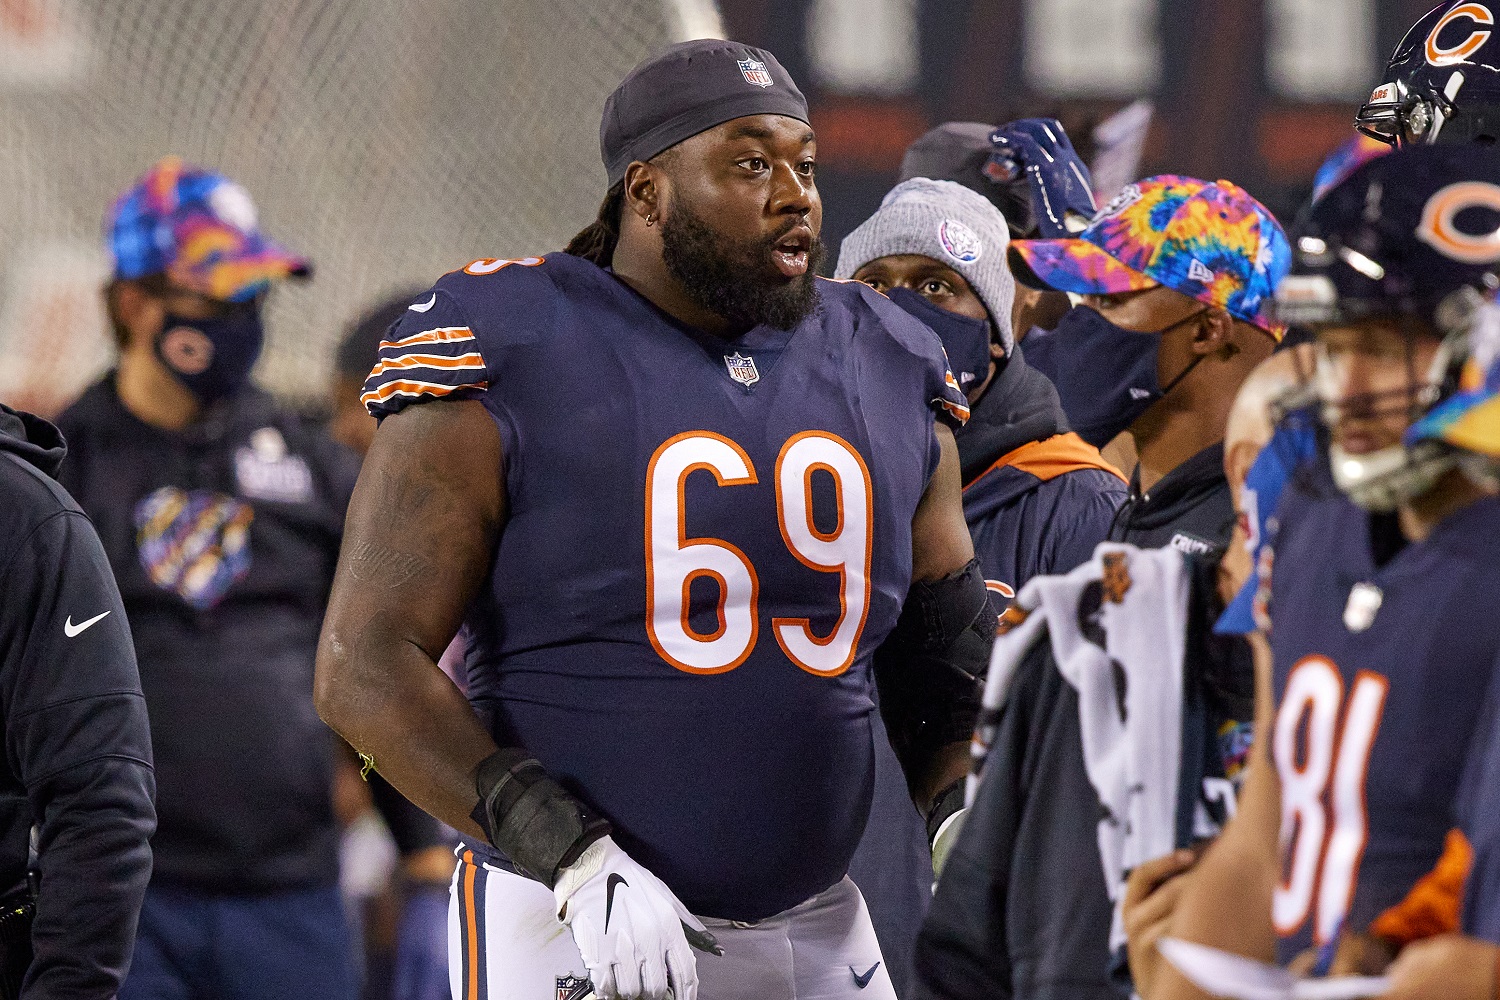 Rashaad Coward has signed with the Pittsburgh Steelers after three seasons on the offensive line for the Chicago Bears.